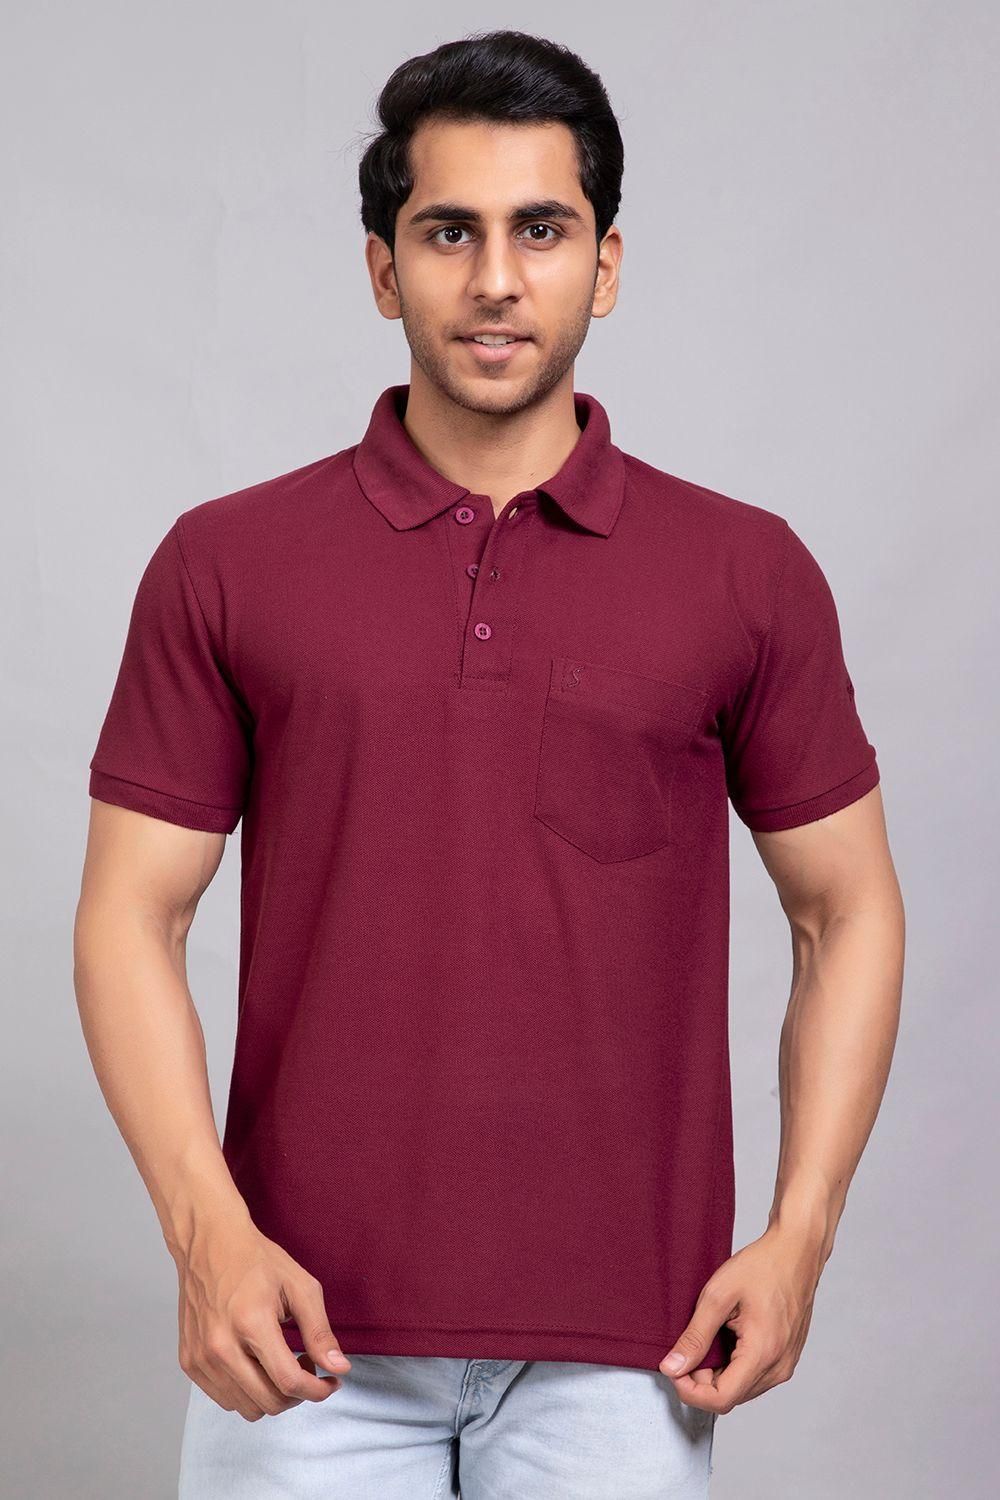 Cotton Solid Half Sleeves Mens Polo T-Shirt (Plus Size)